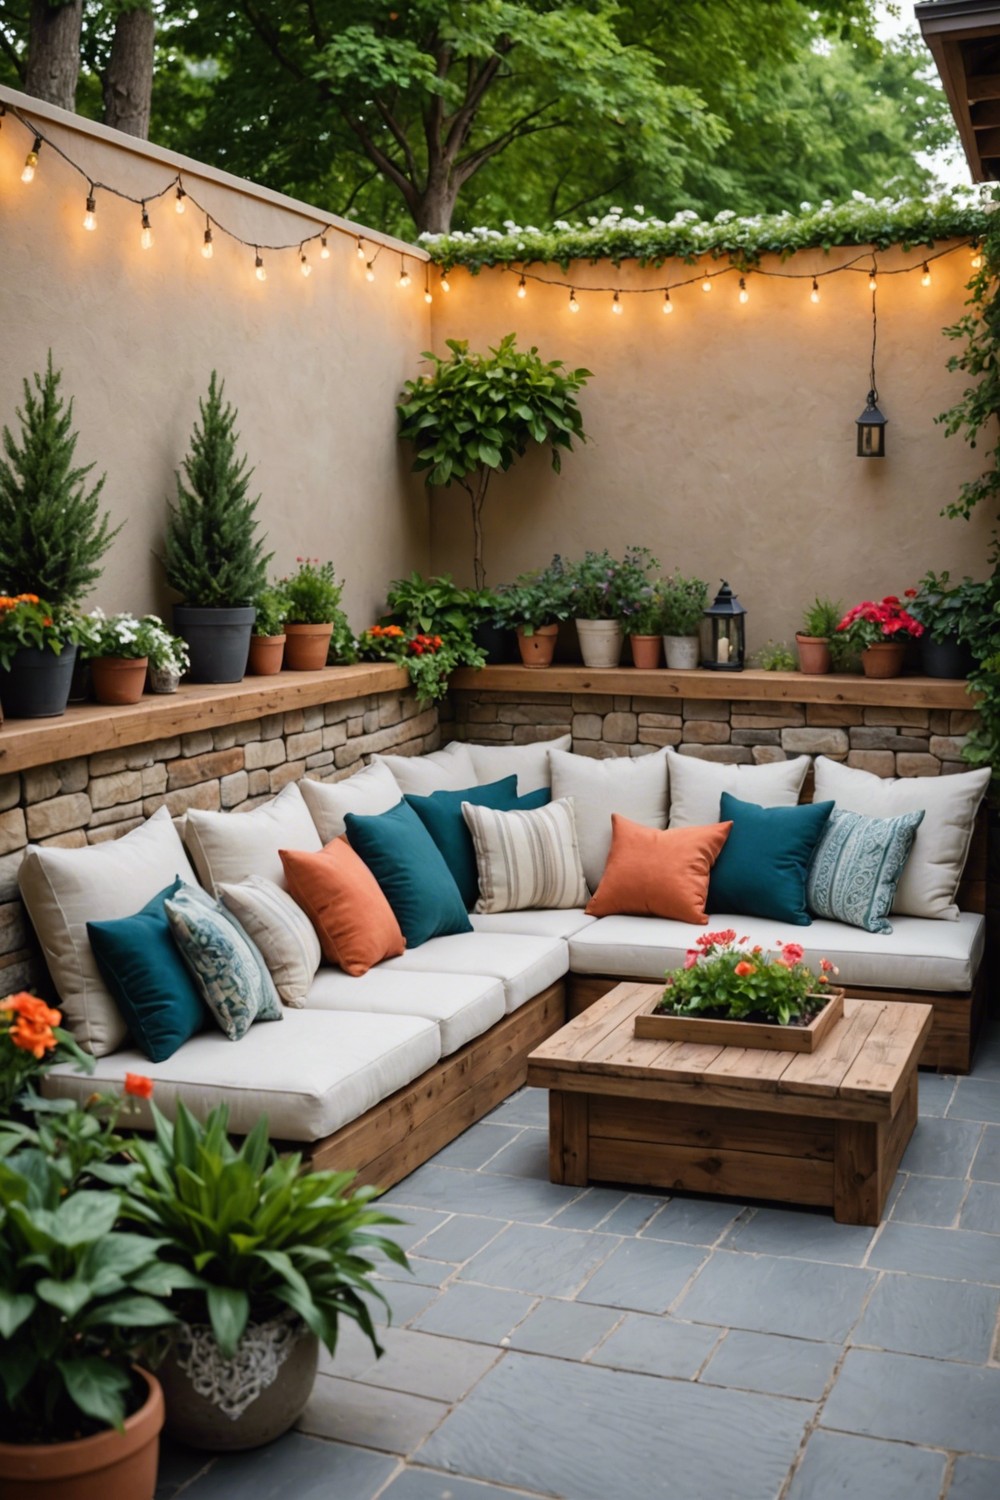 Patio with Built-In Seating and Planters